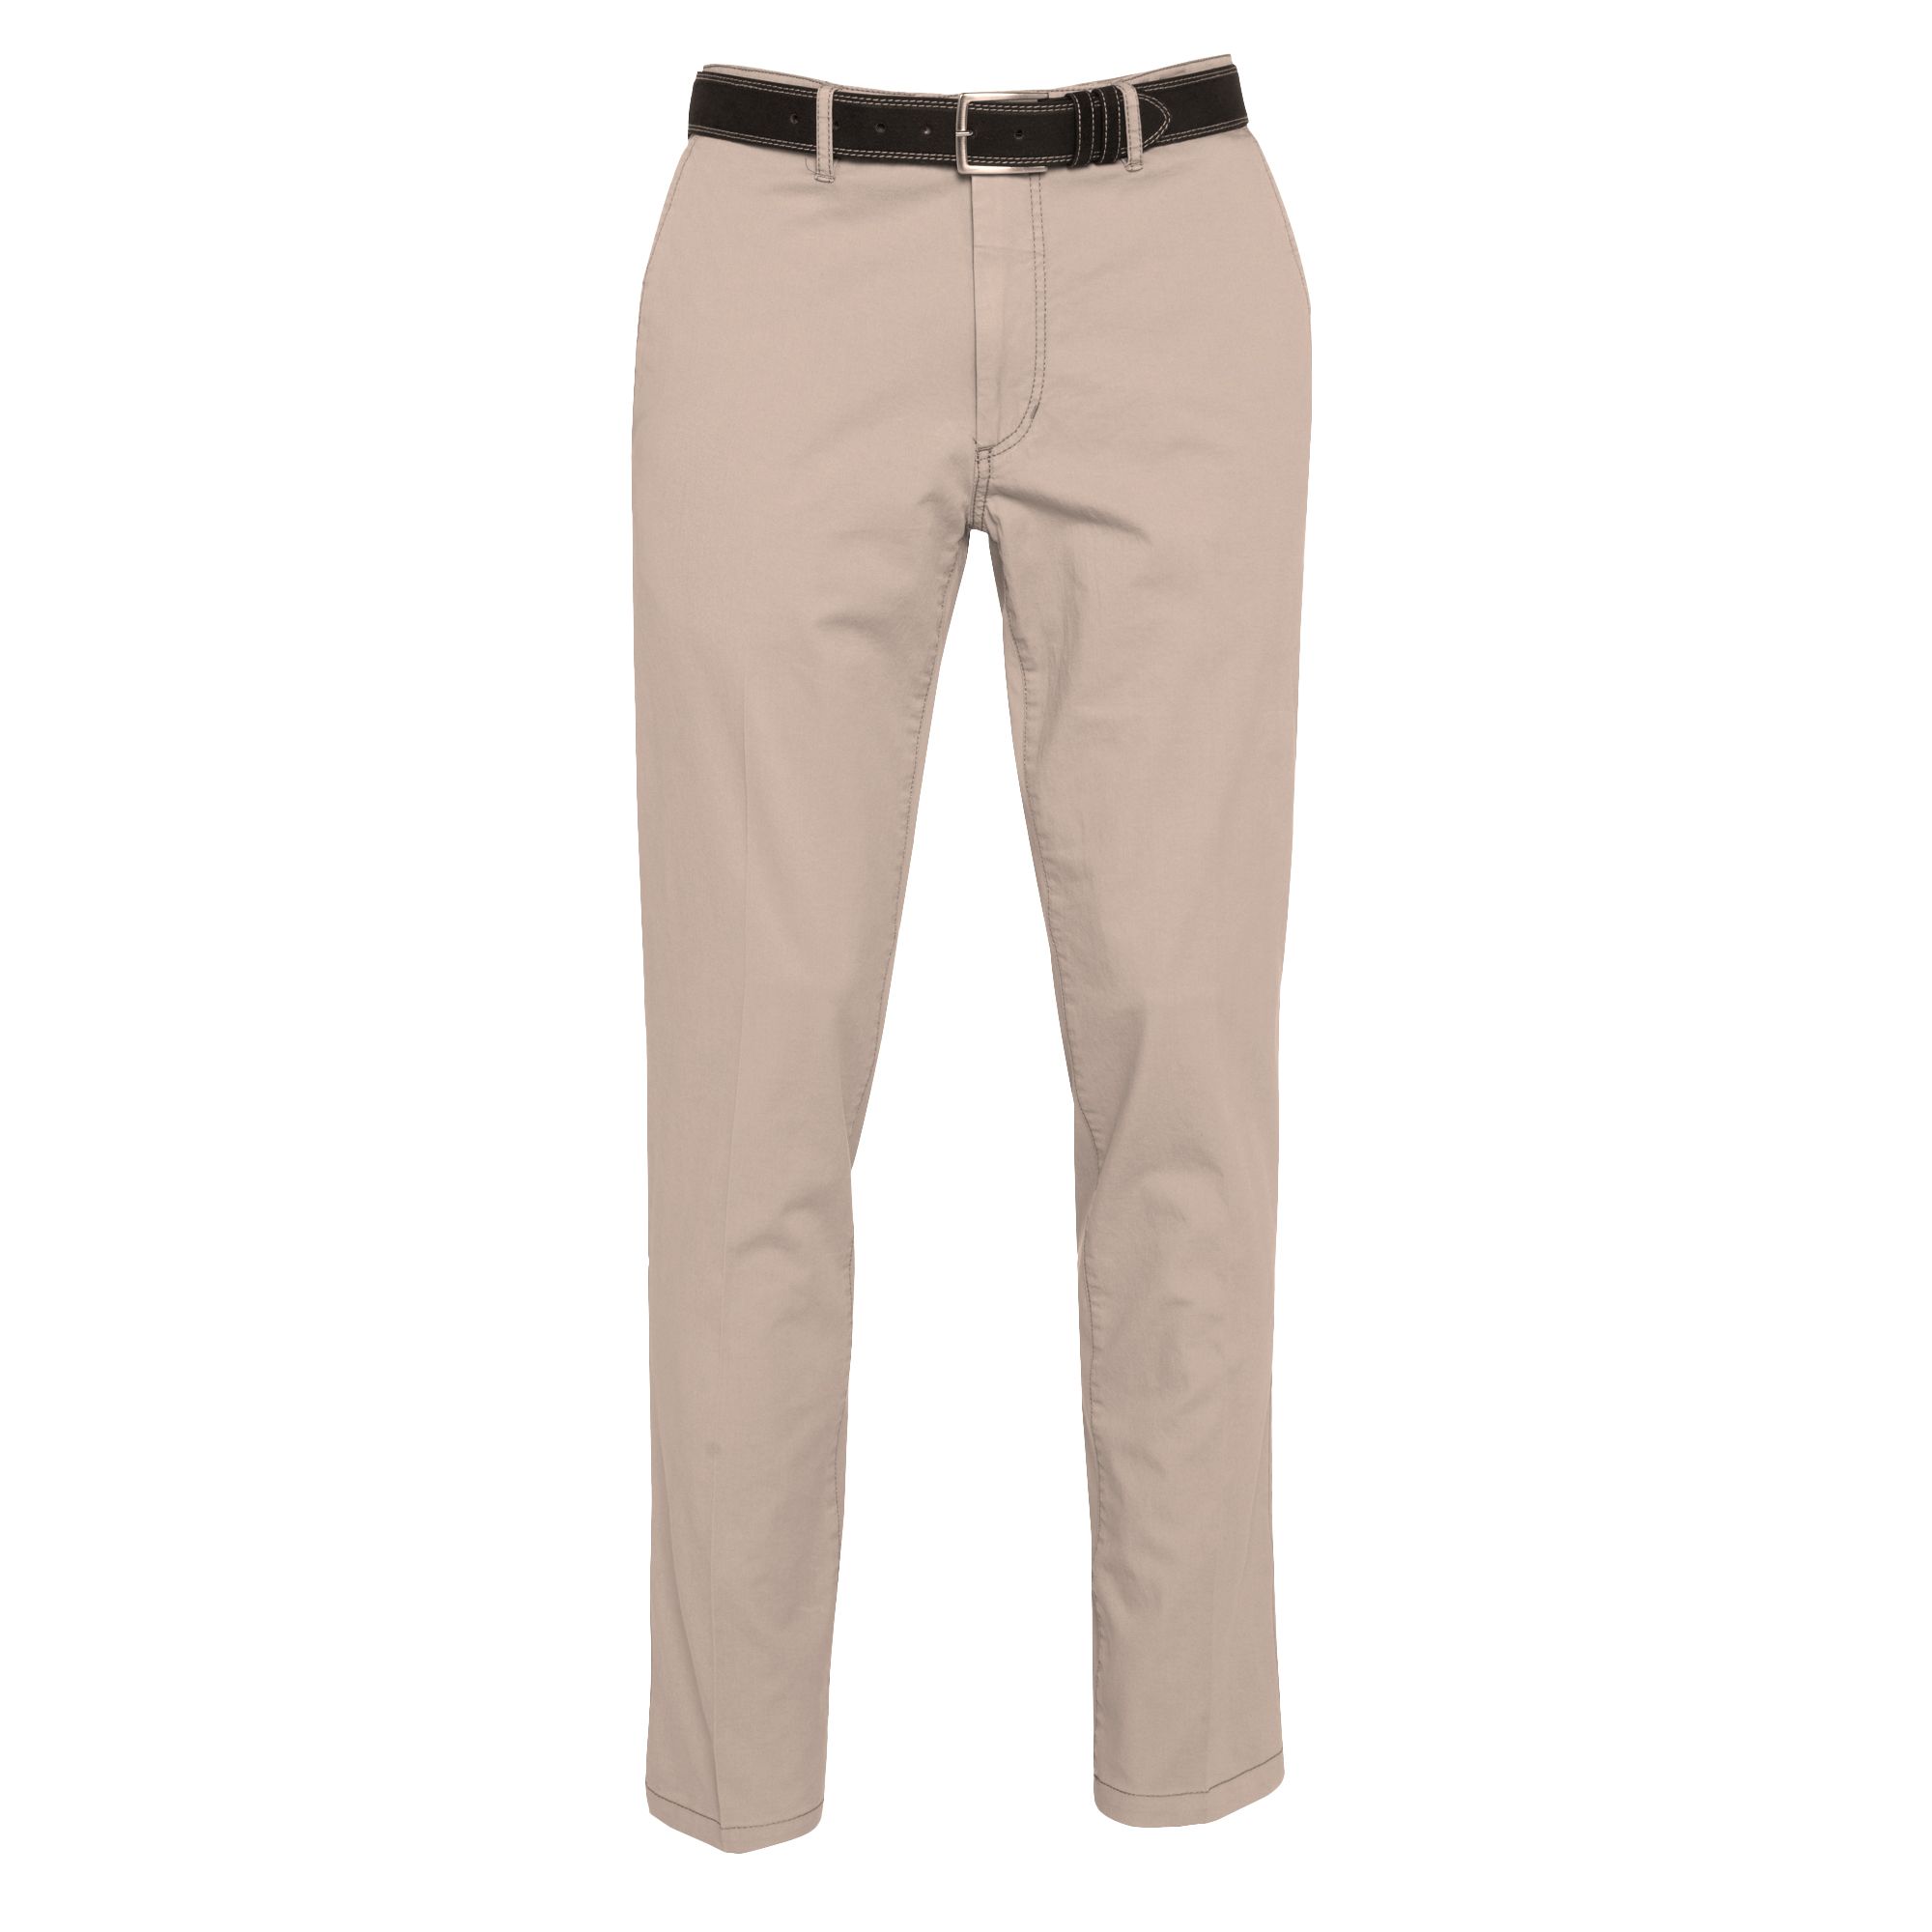 Dungloe Classic Washed Trouser